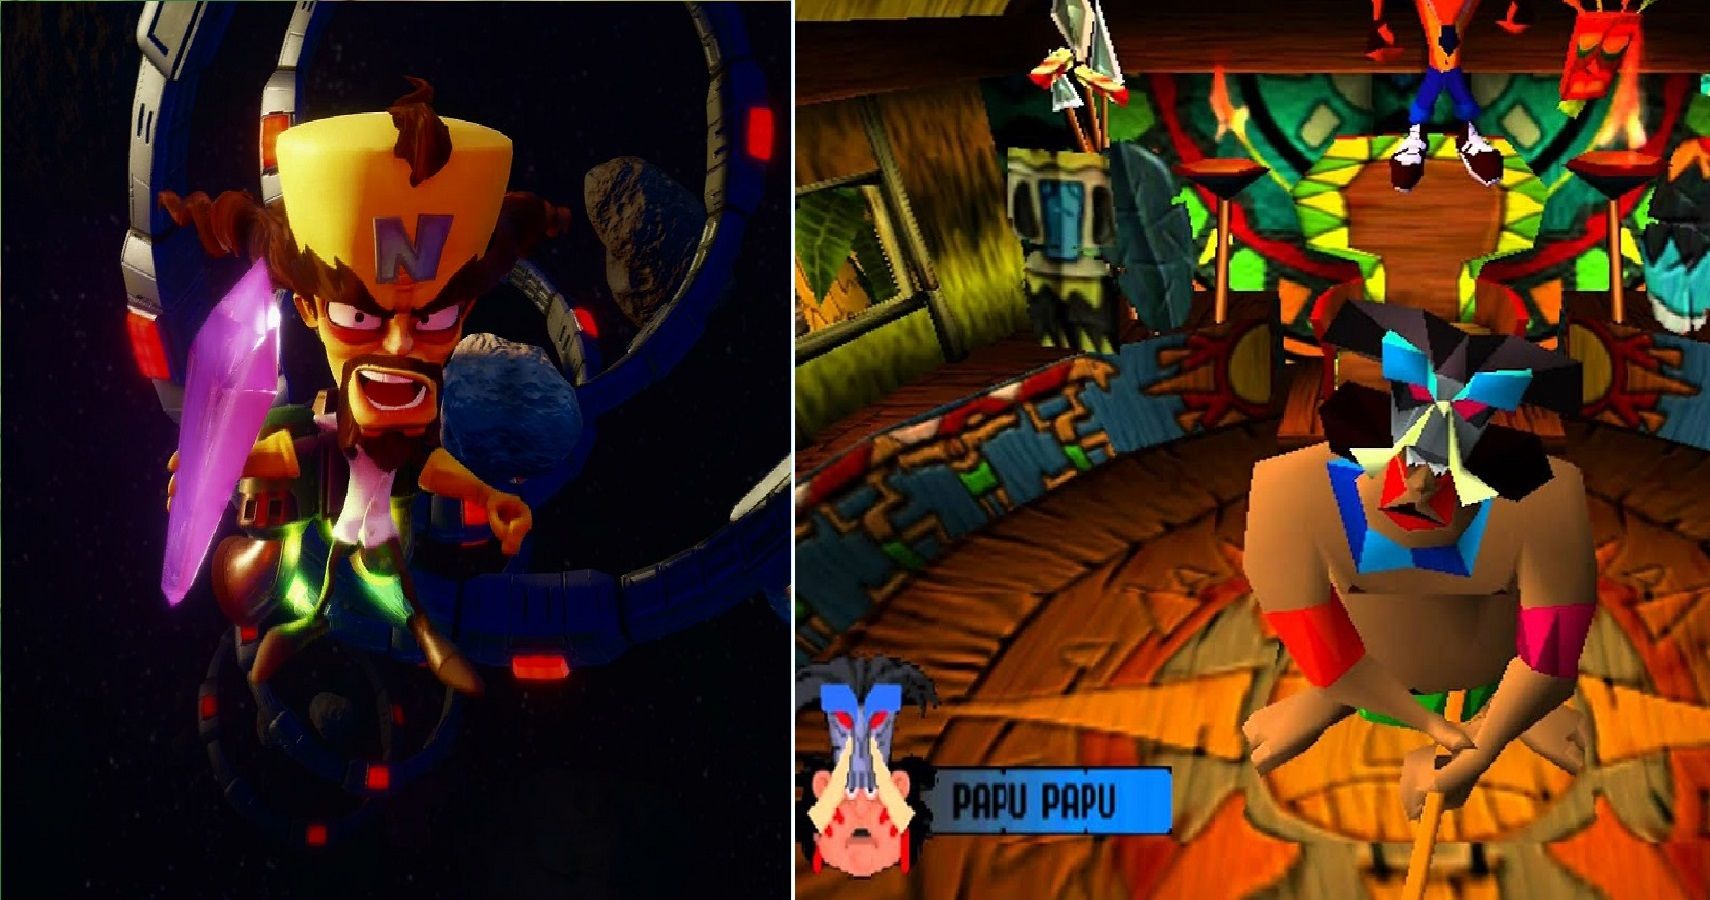 The Best Characters In Crash Bandicoot